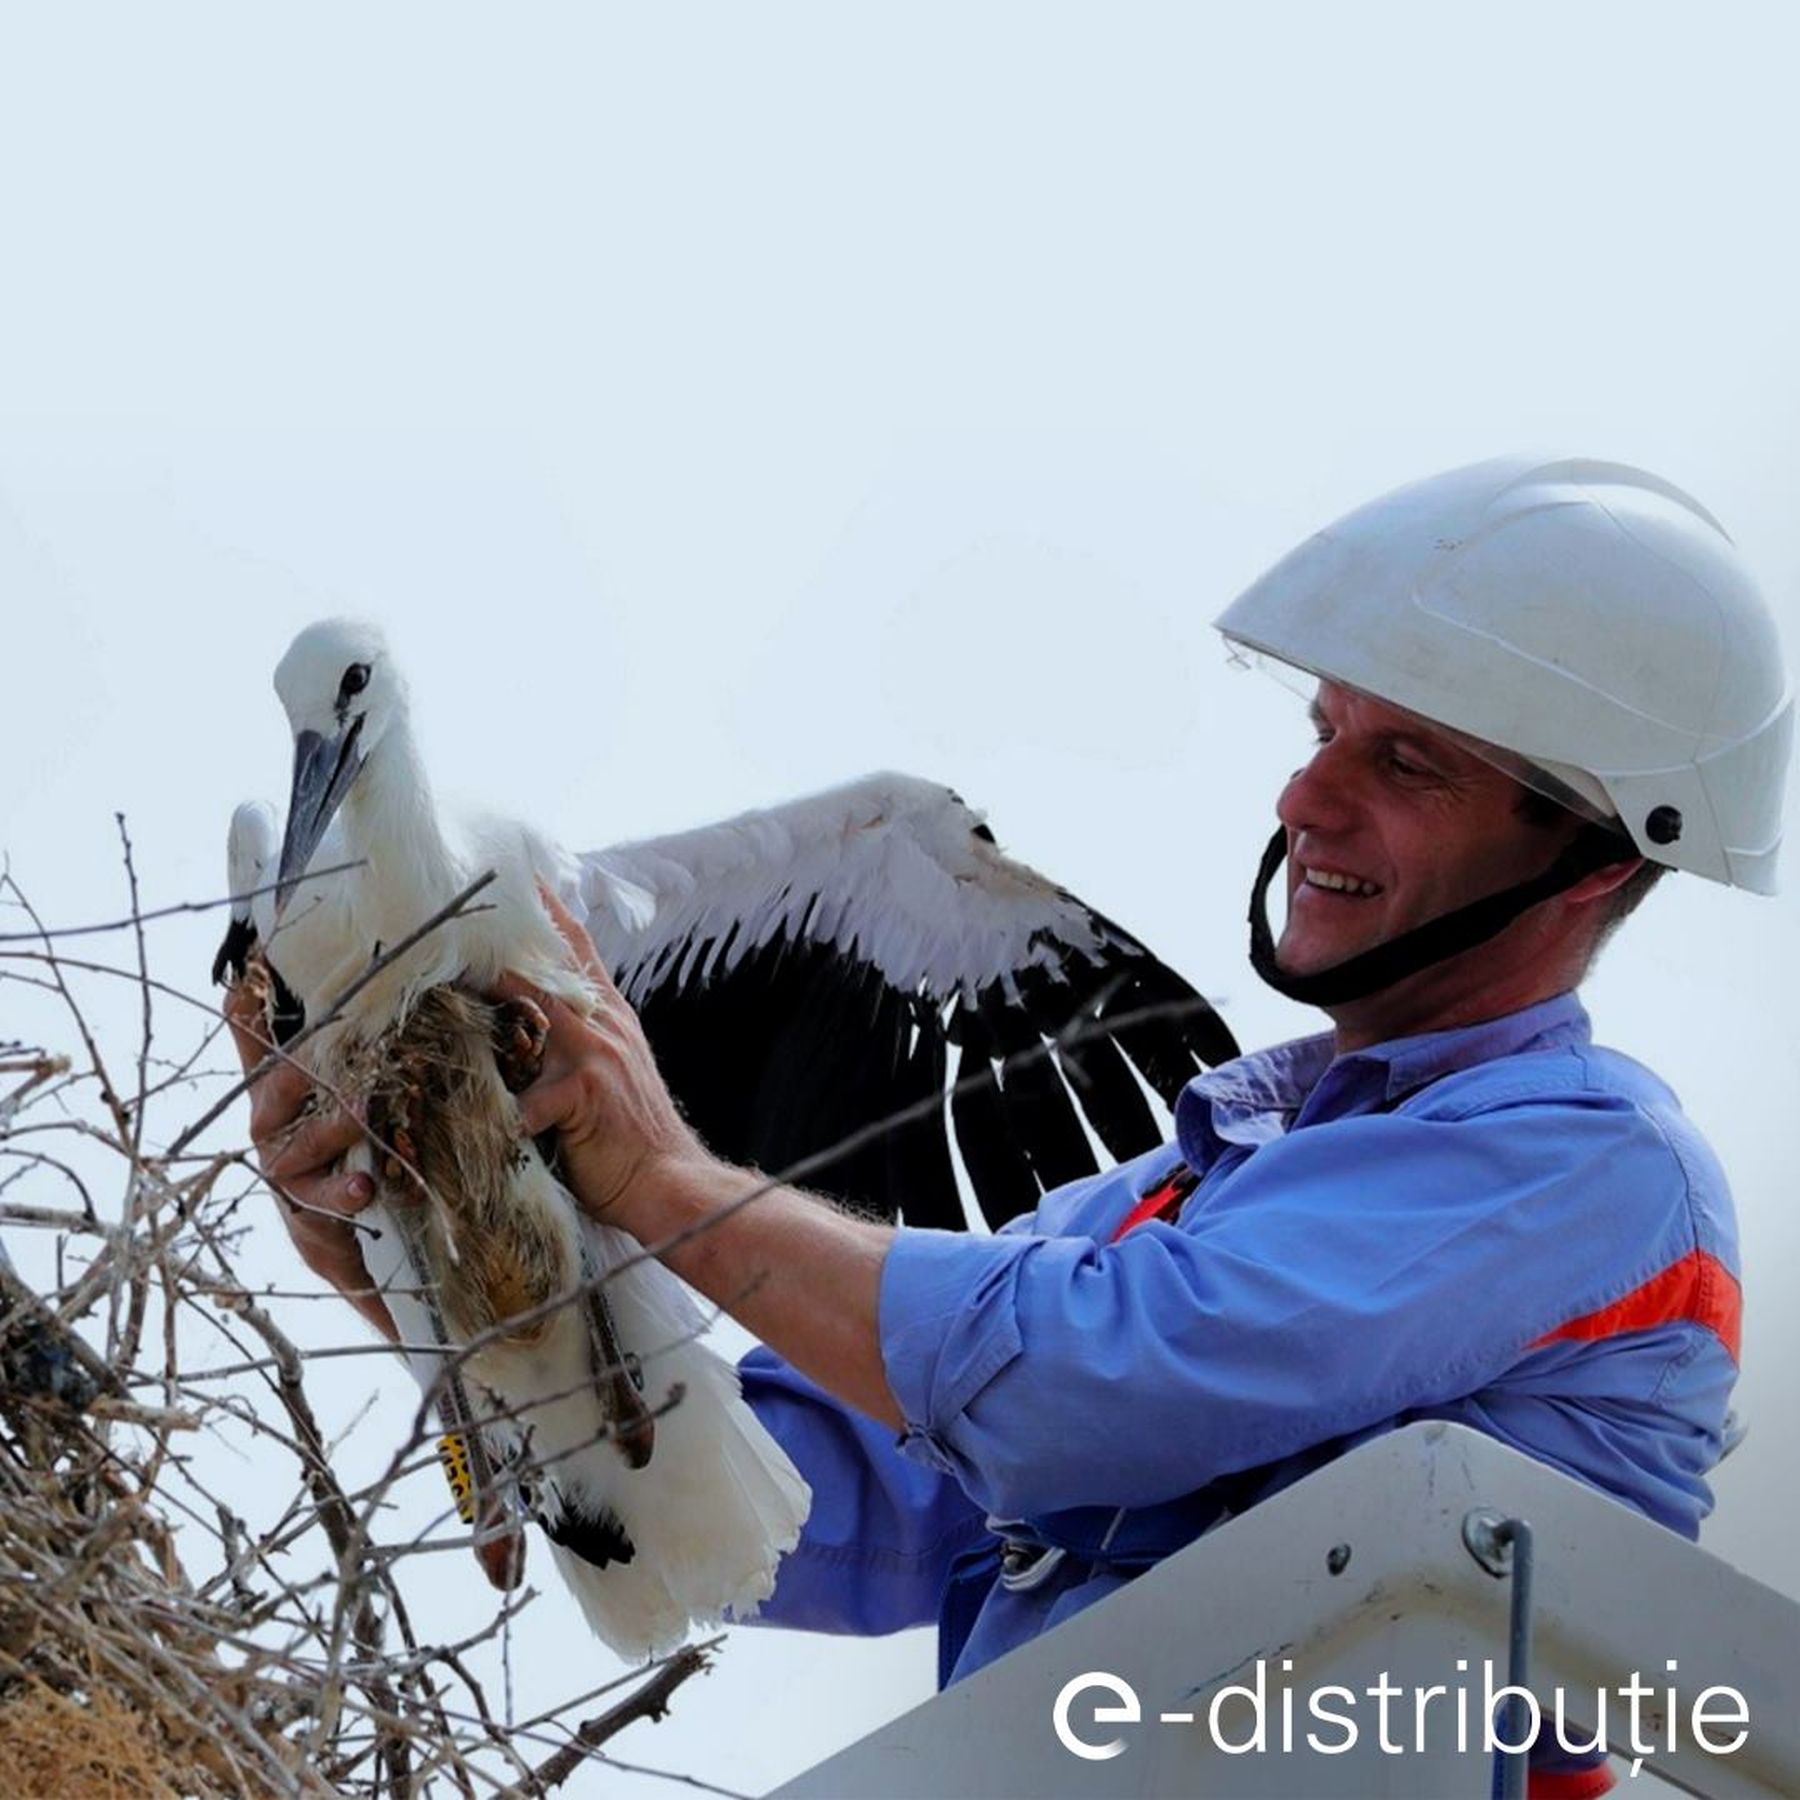 Man holding a stork above the nest on the utility pole